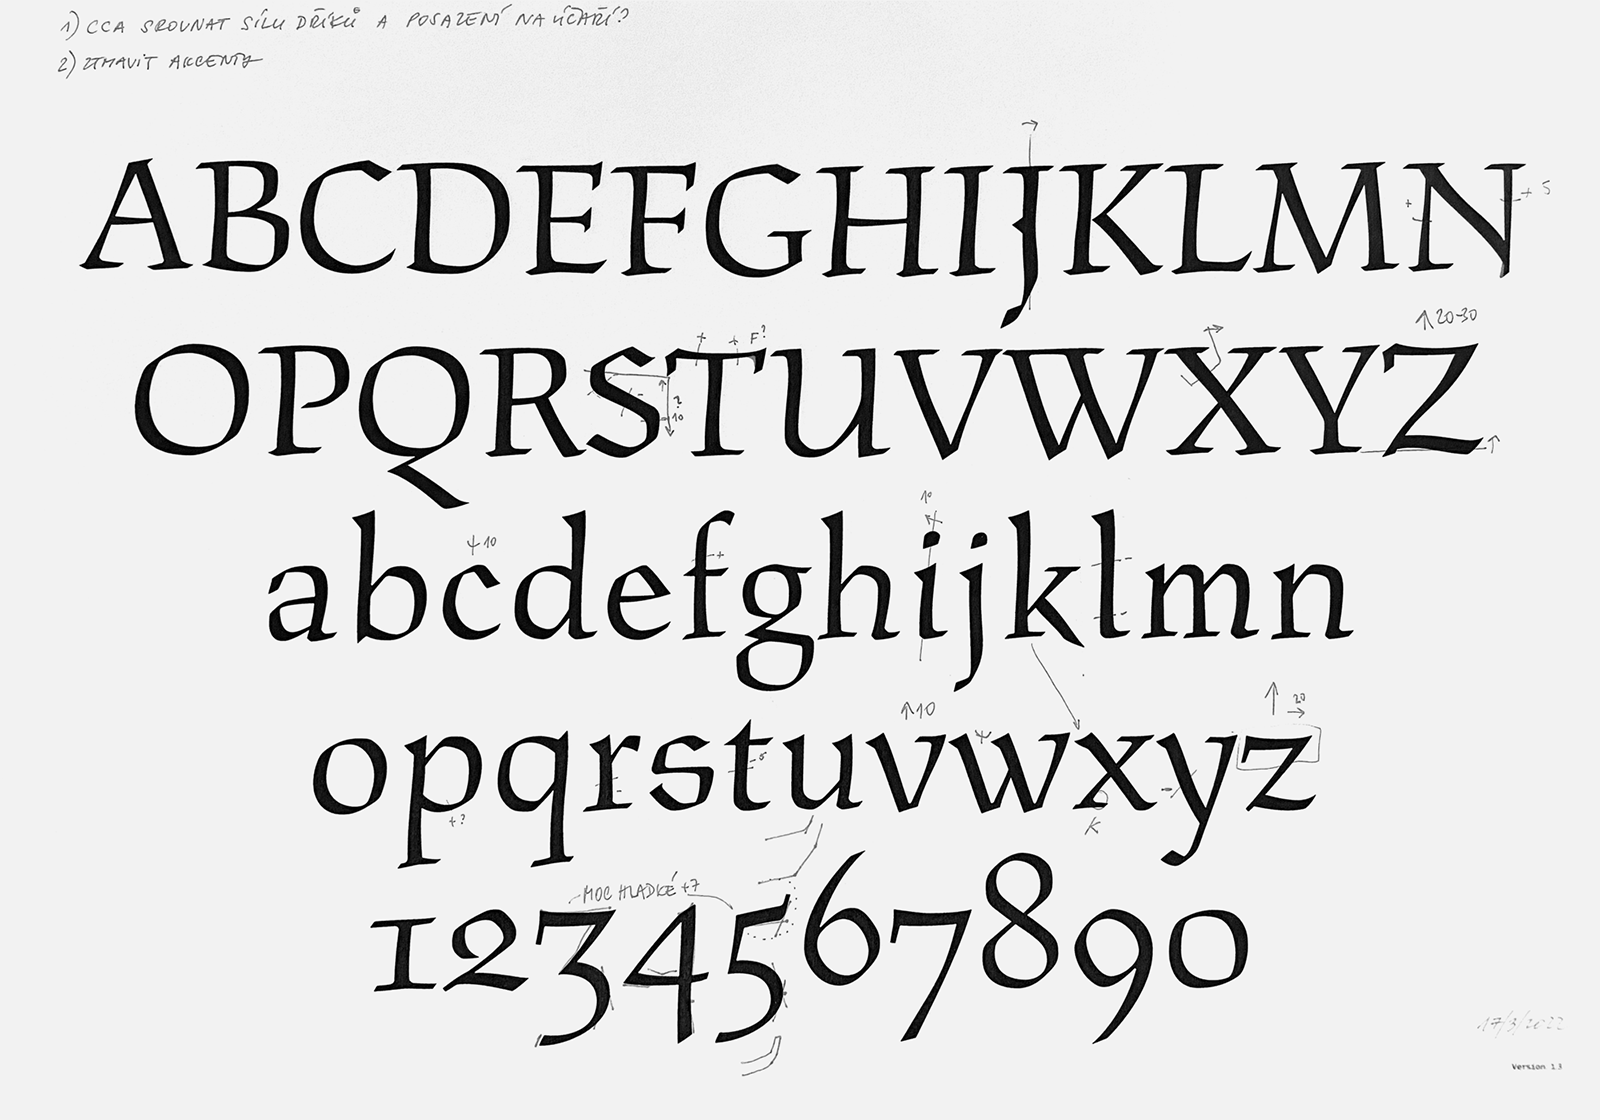 A series of corrections to the Parlament typeface carried out on the authentic version.